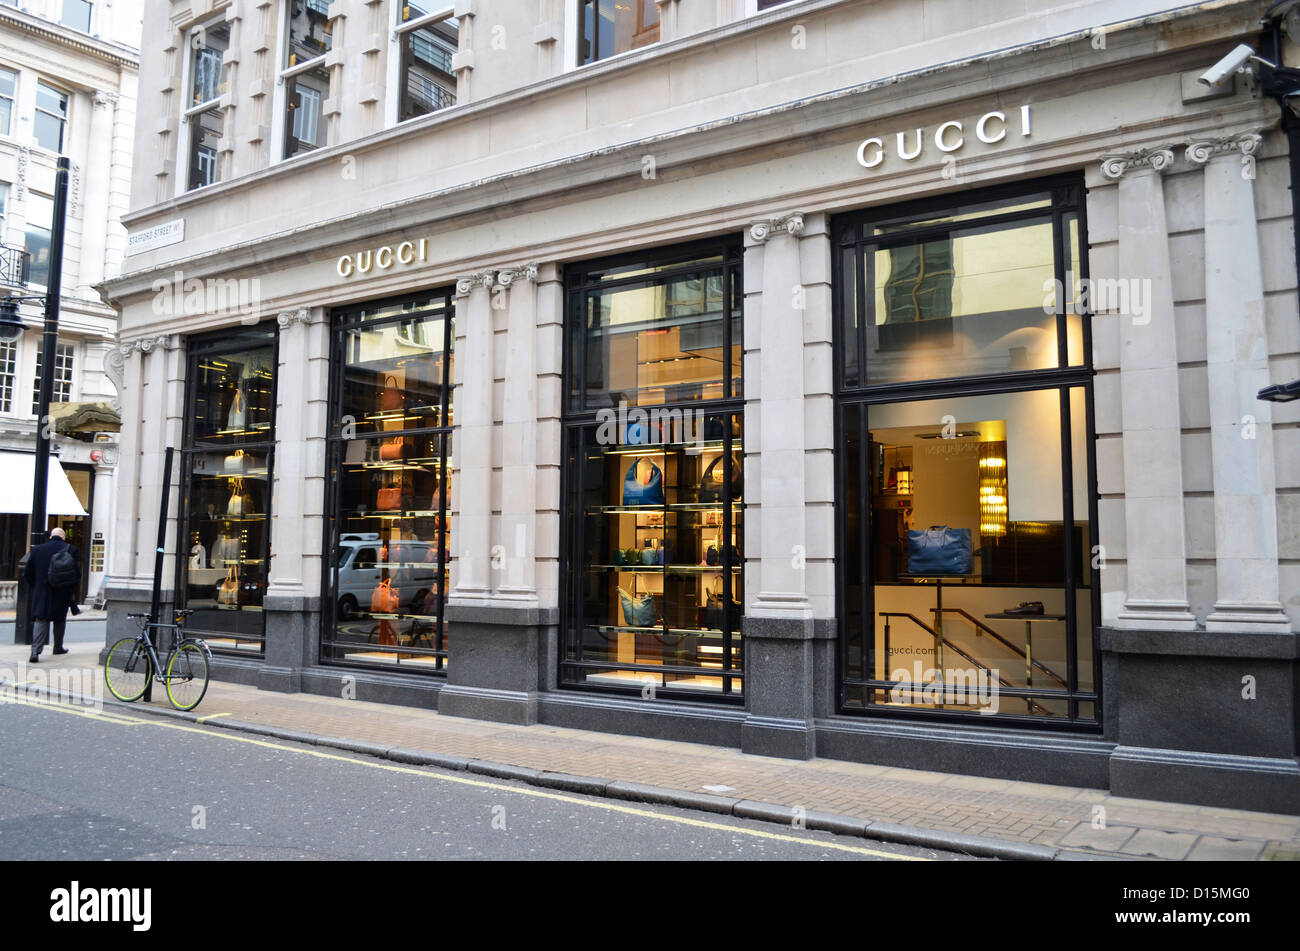 Gucci Factory Outlet London | MSU 